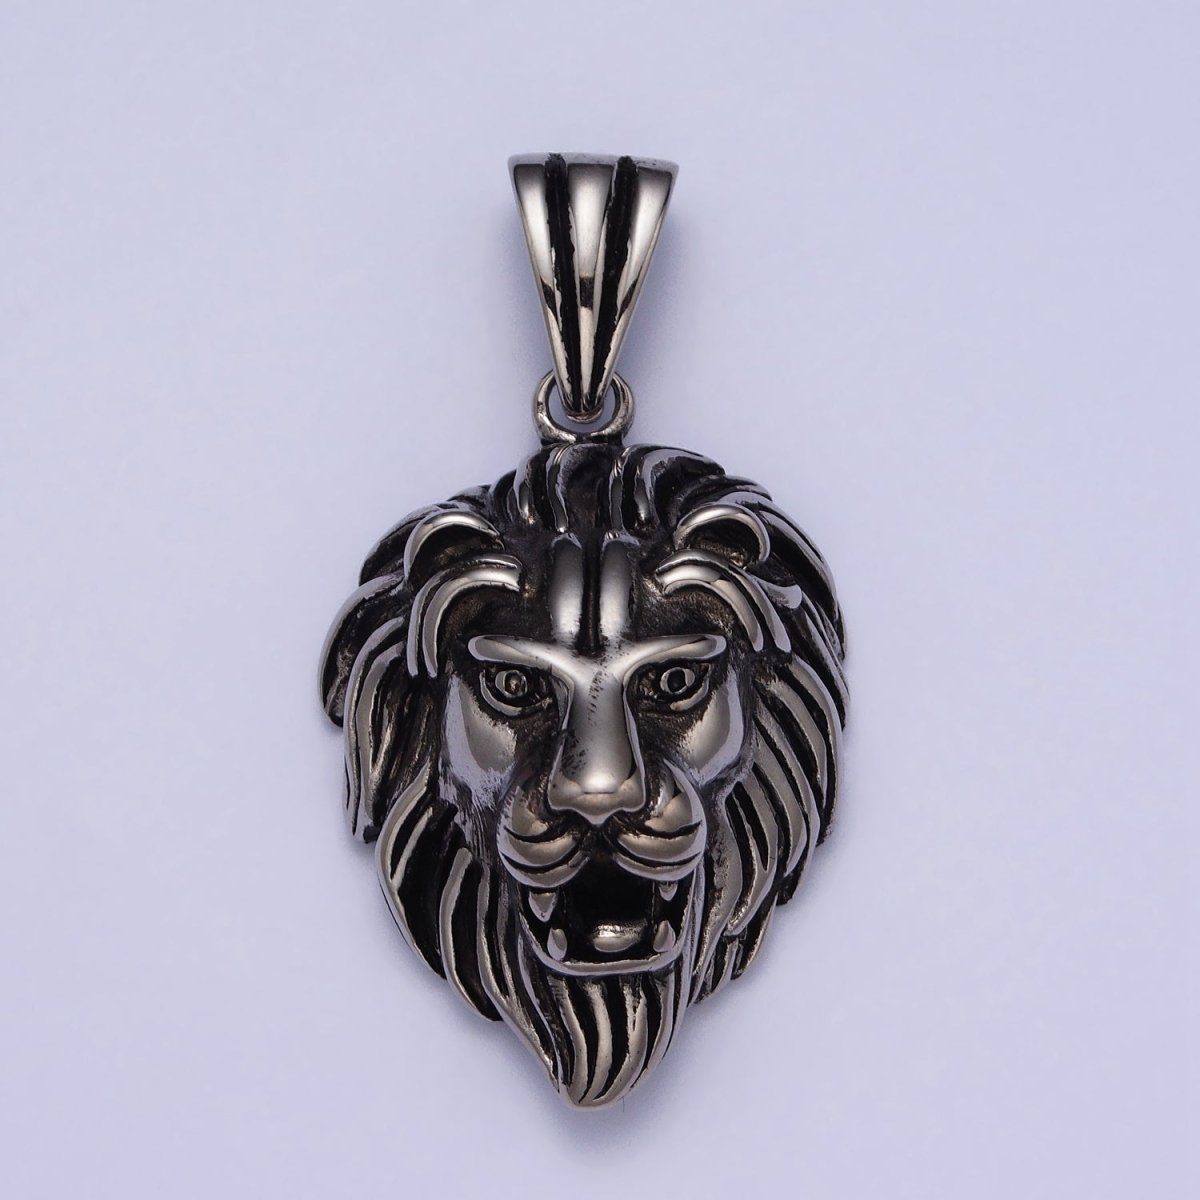 Stainless Steel Roaring Lion Forest King Head Animal Pendant in Gold & Silver J-455 J-457 - DLUXCA